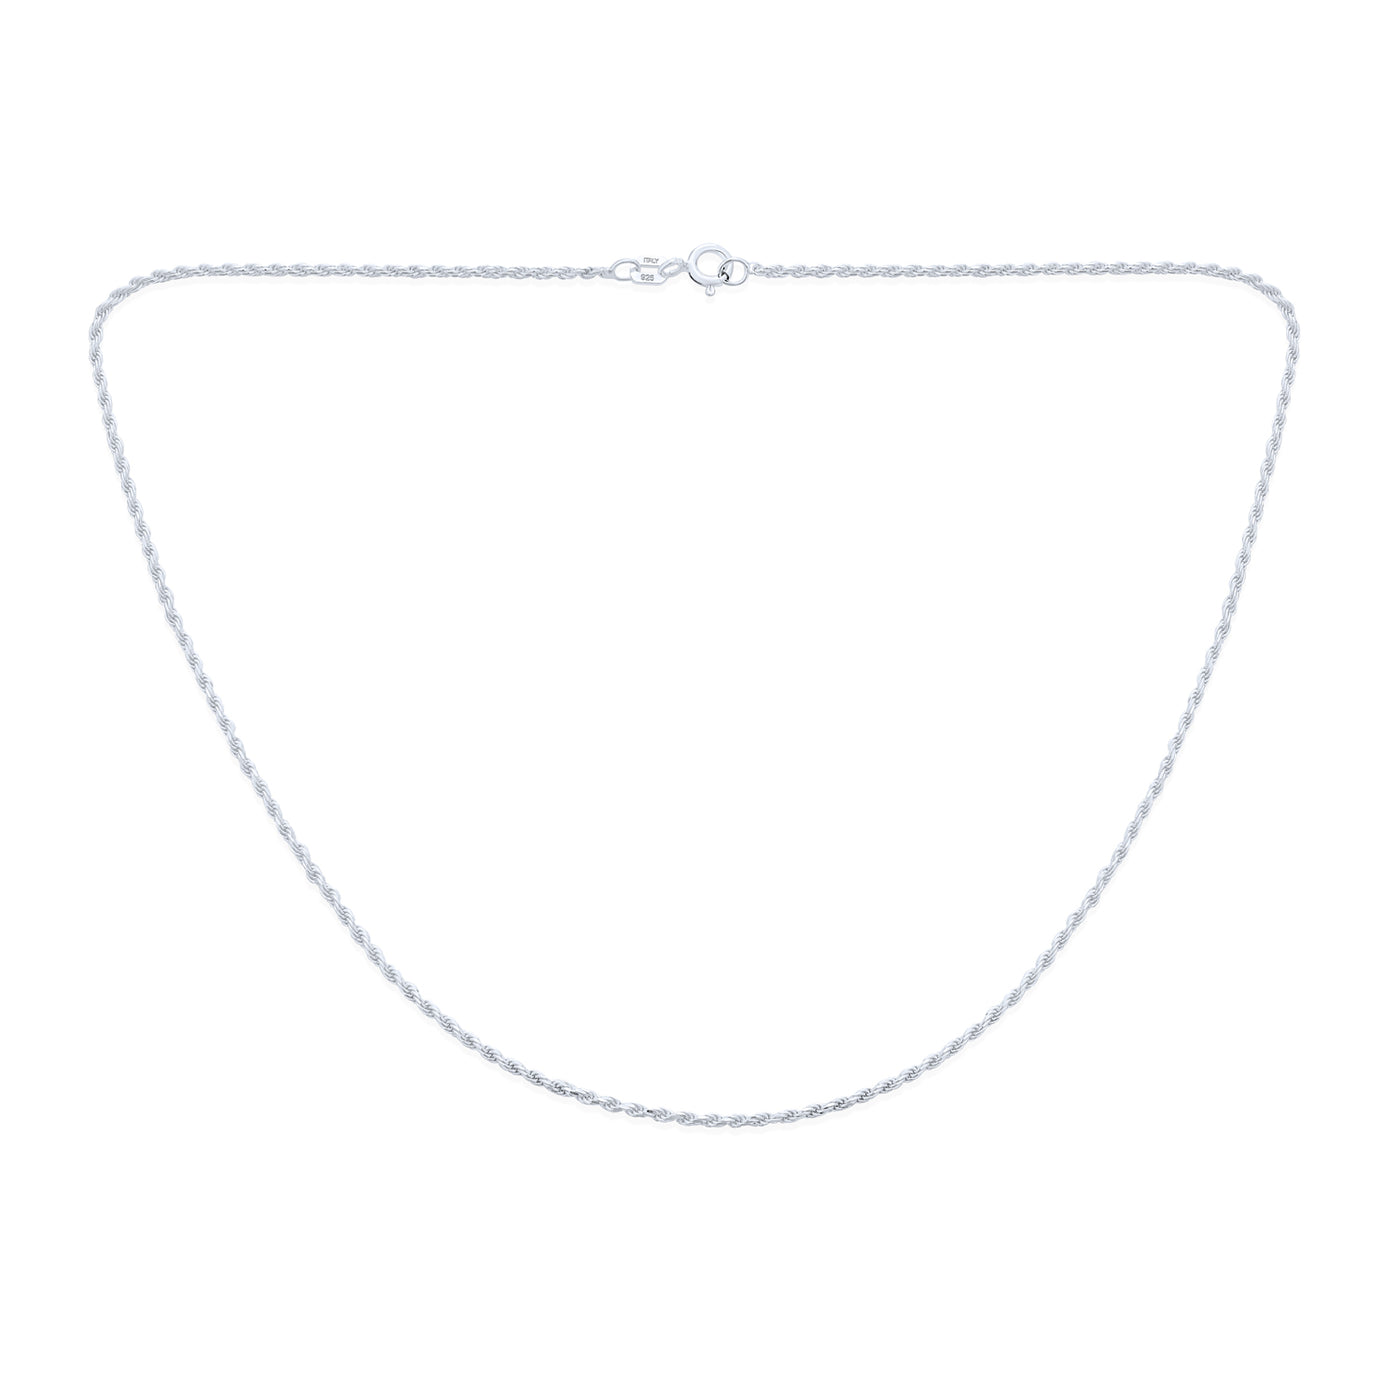 Rope Chain 2 MM 030 Gauge Necklace .925 Sterling Silver Made In Italy